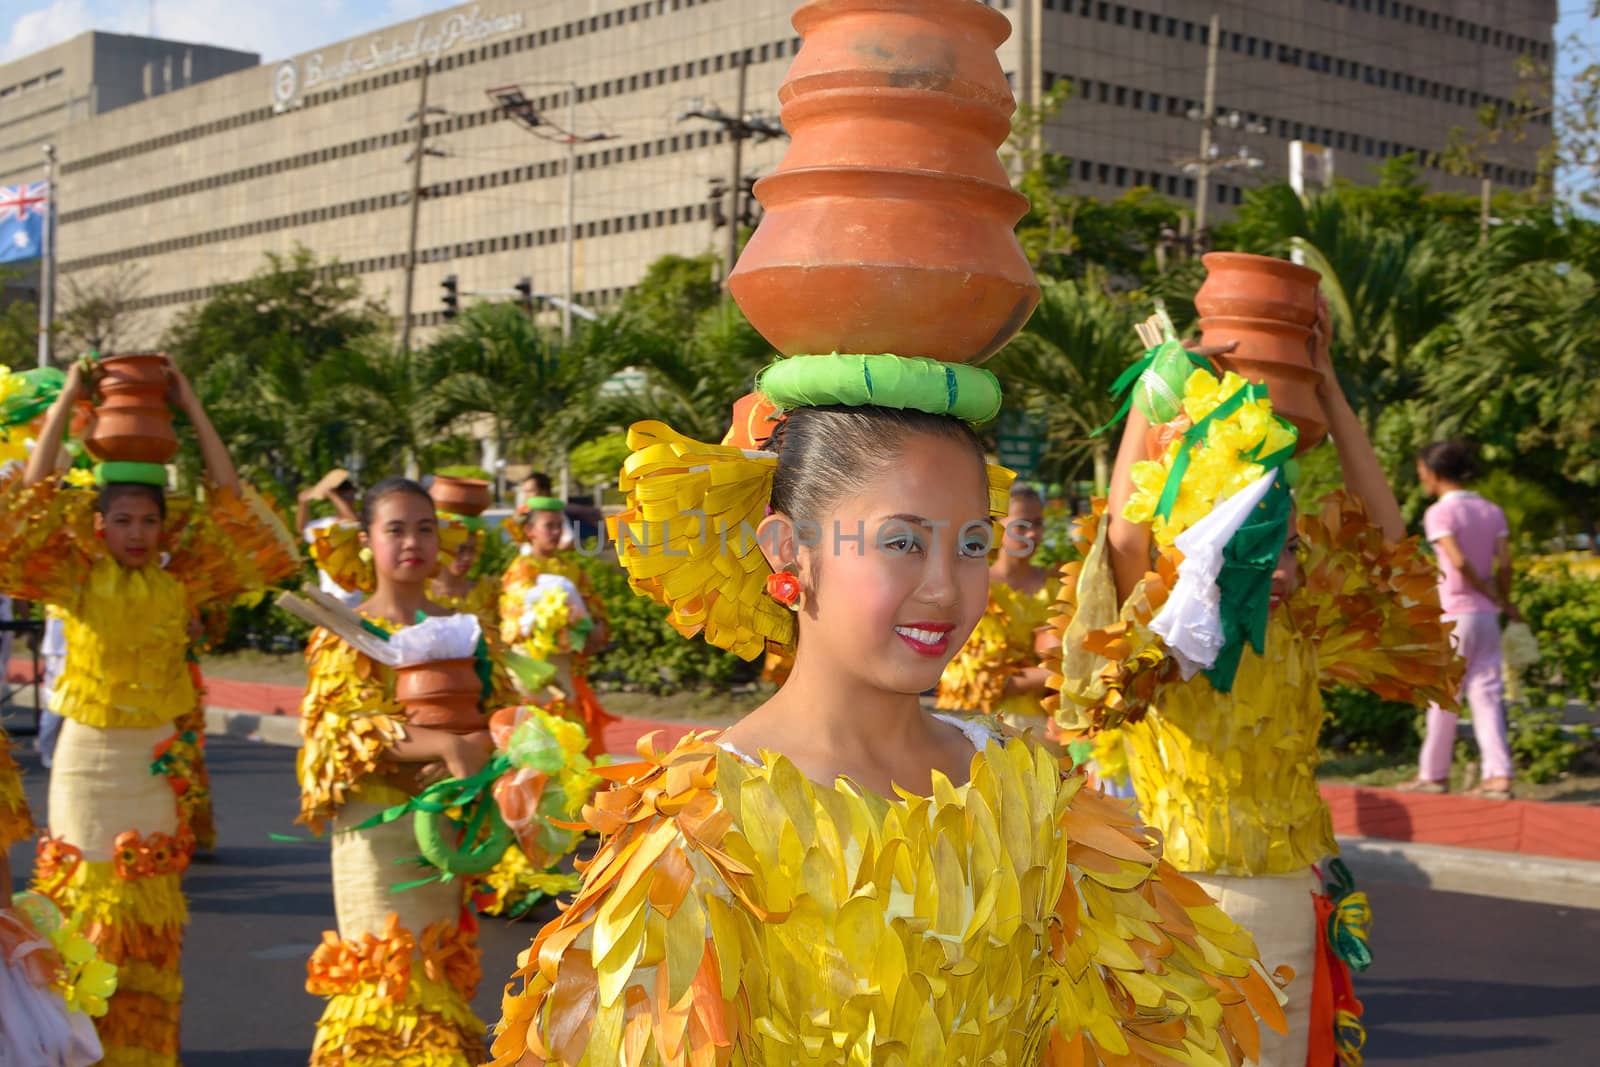 MANILA, PHILIPPINES - APR. 14: street dancers in their cultural outfit  during Aliwan Fiesta, which is the biggest annual national festival competition on April 14, 2012 in Manila Philippines.